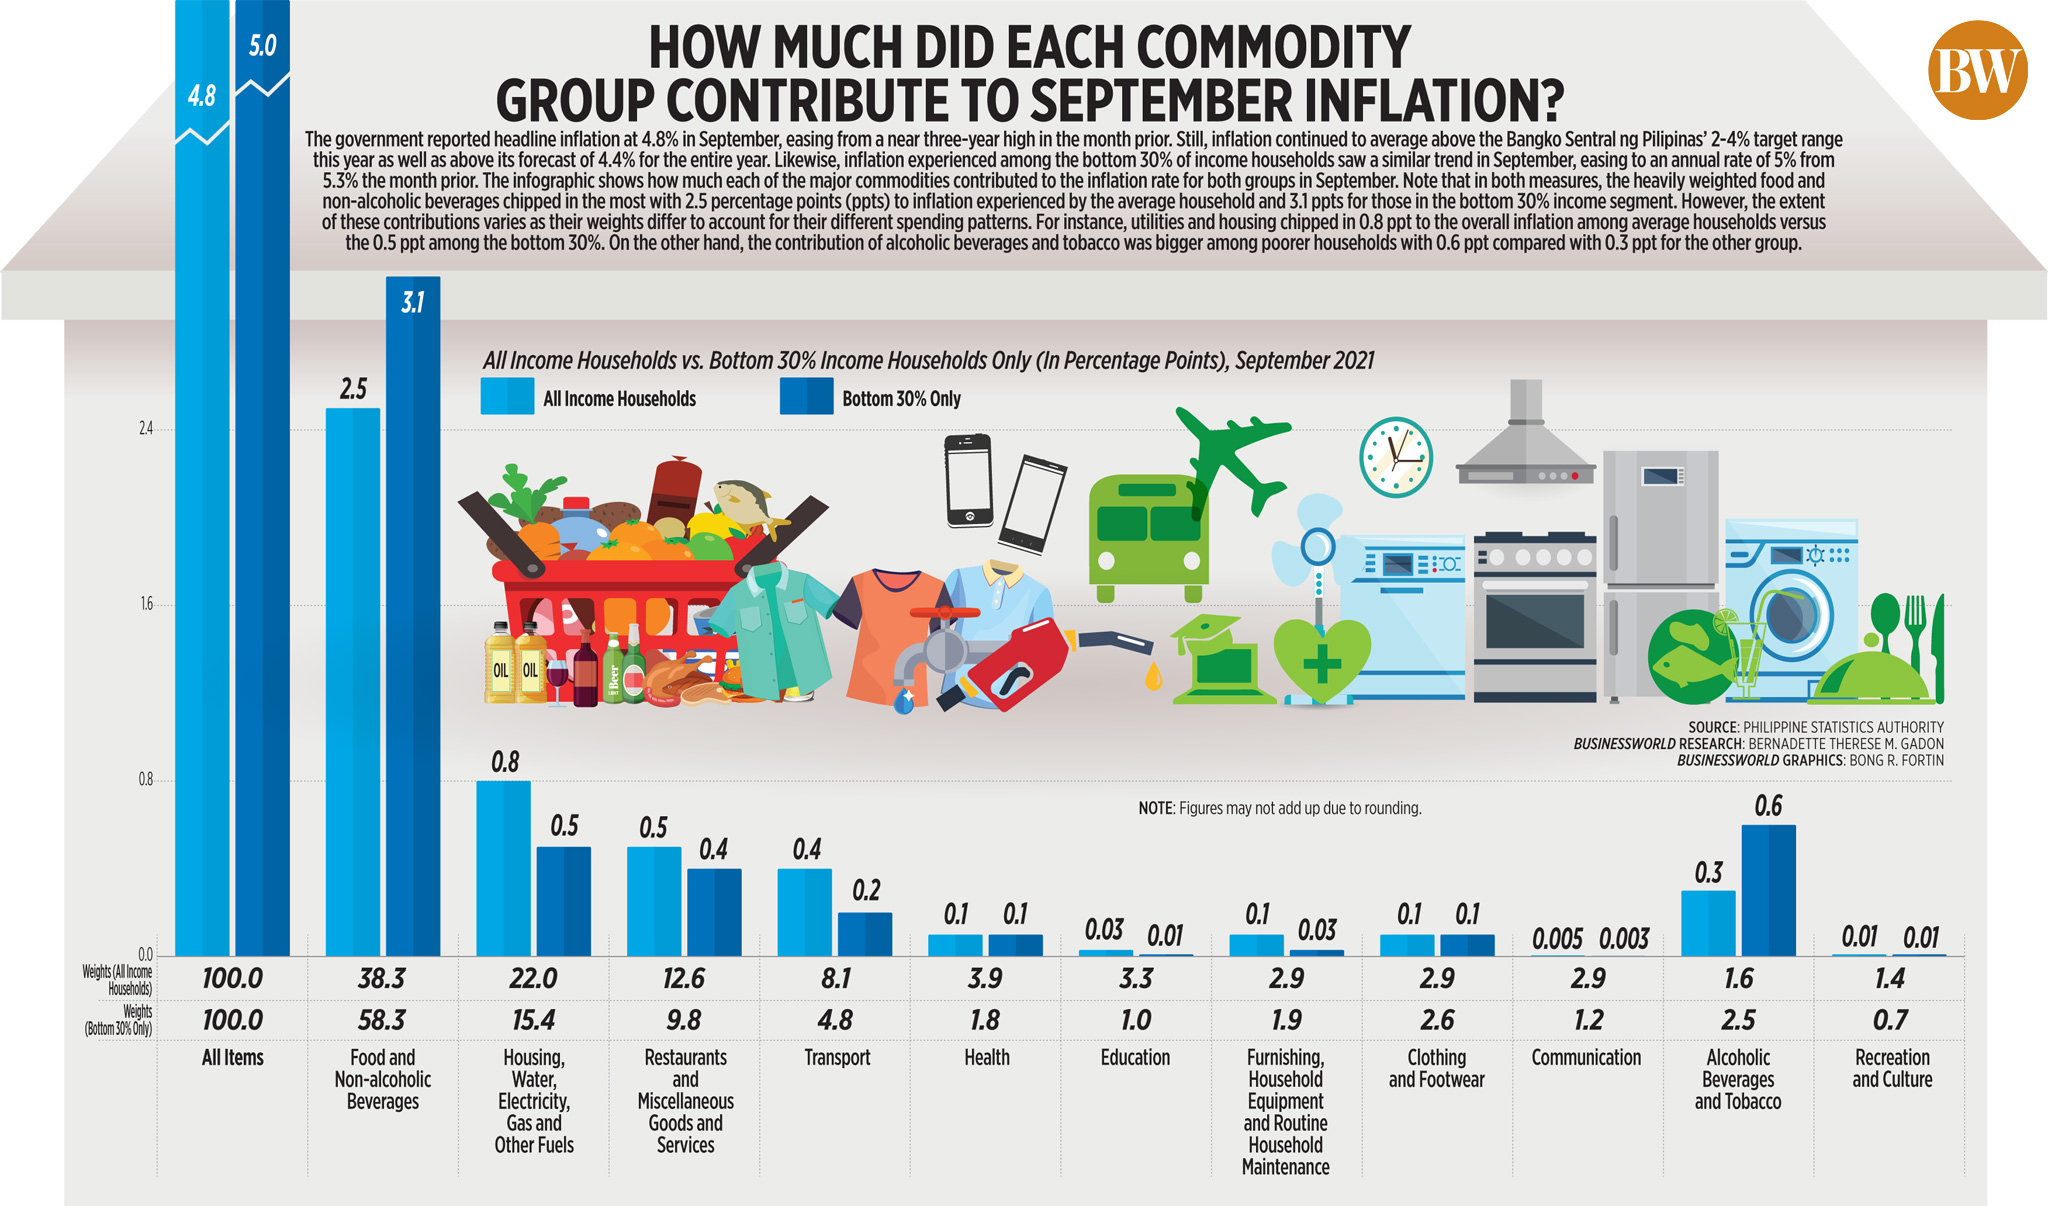 How much did each commodity group contribute to September inflation?